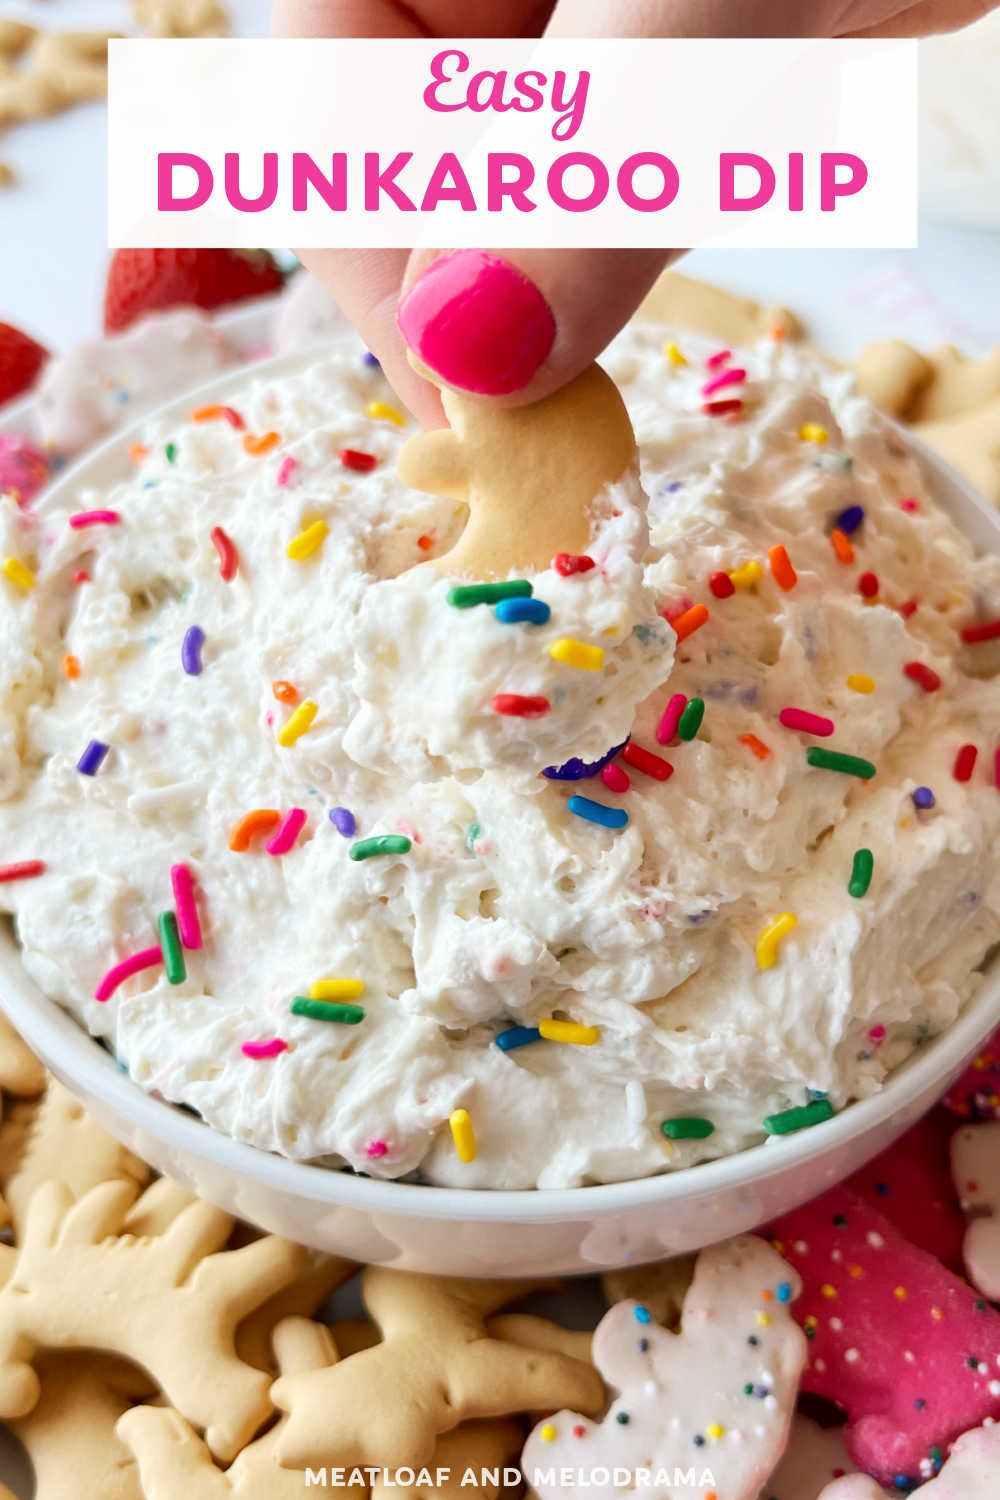 Dunkaroo Dip or Funfetti Cake Batter Dip is an easy dessert dip made with a box of Funfetti cake mix, Cool Whip, vanilla yogurt and rainbow sprinkles. An easy sweet treat the whole family will love. Perfect for birthday parties and baby showers! via @meamel